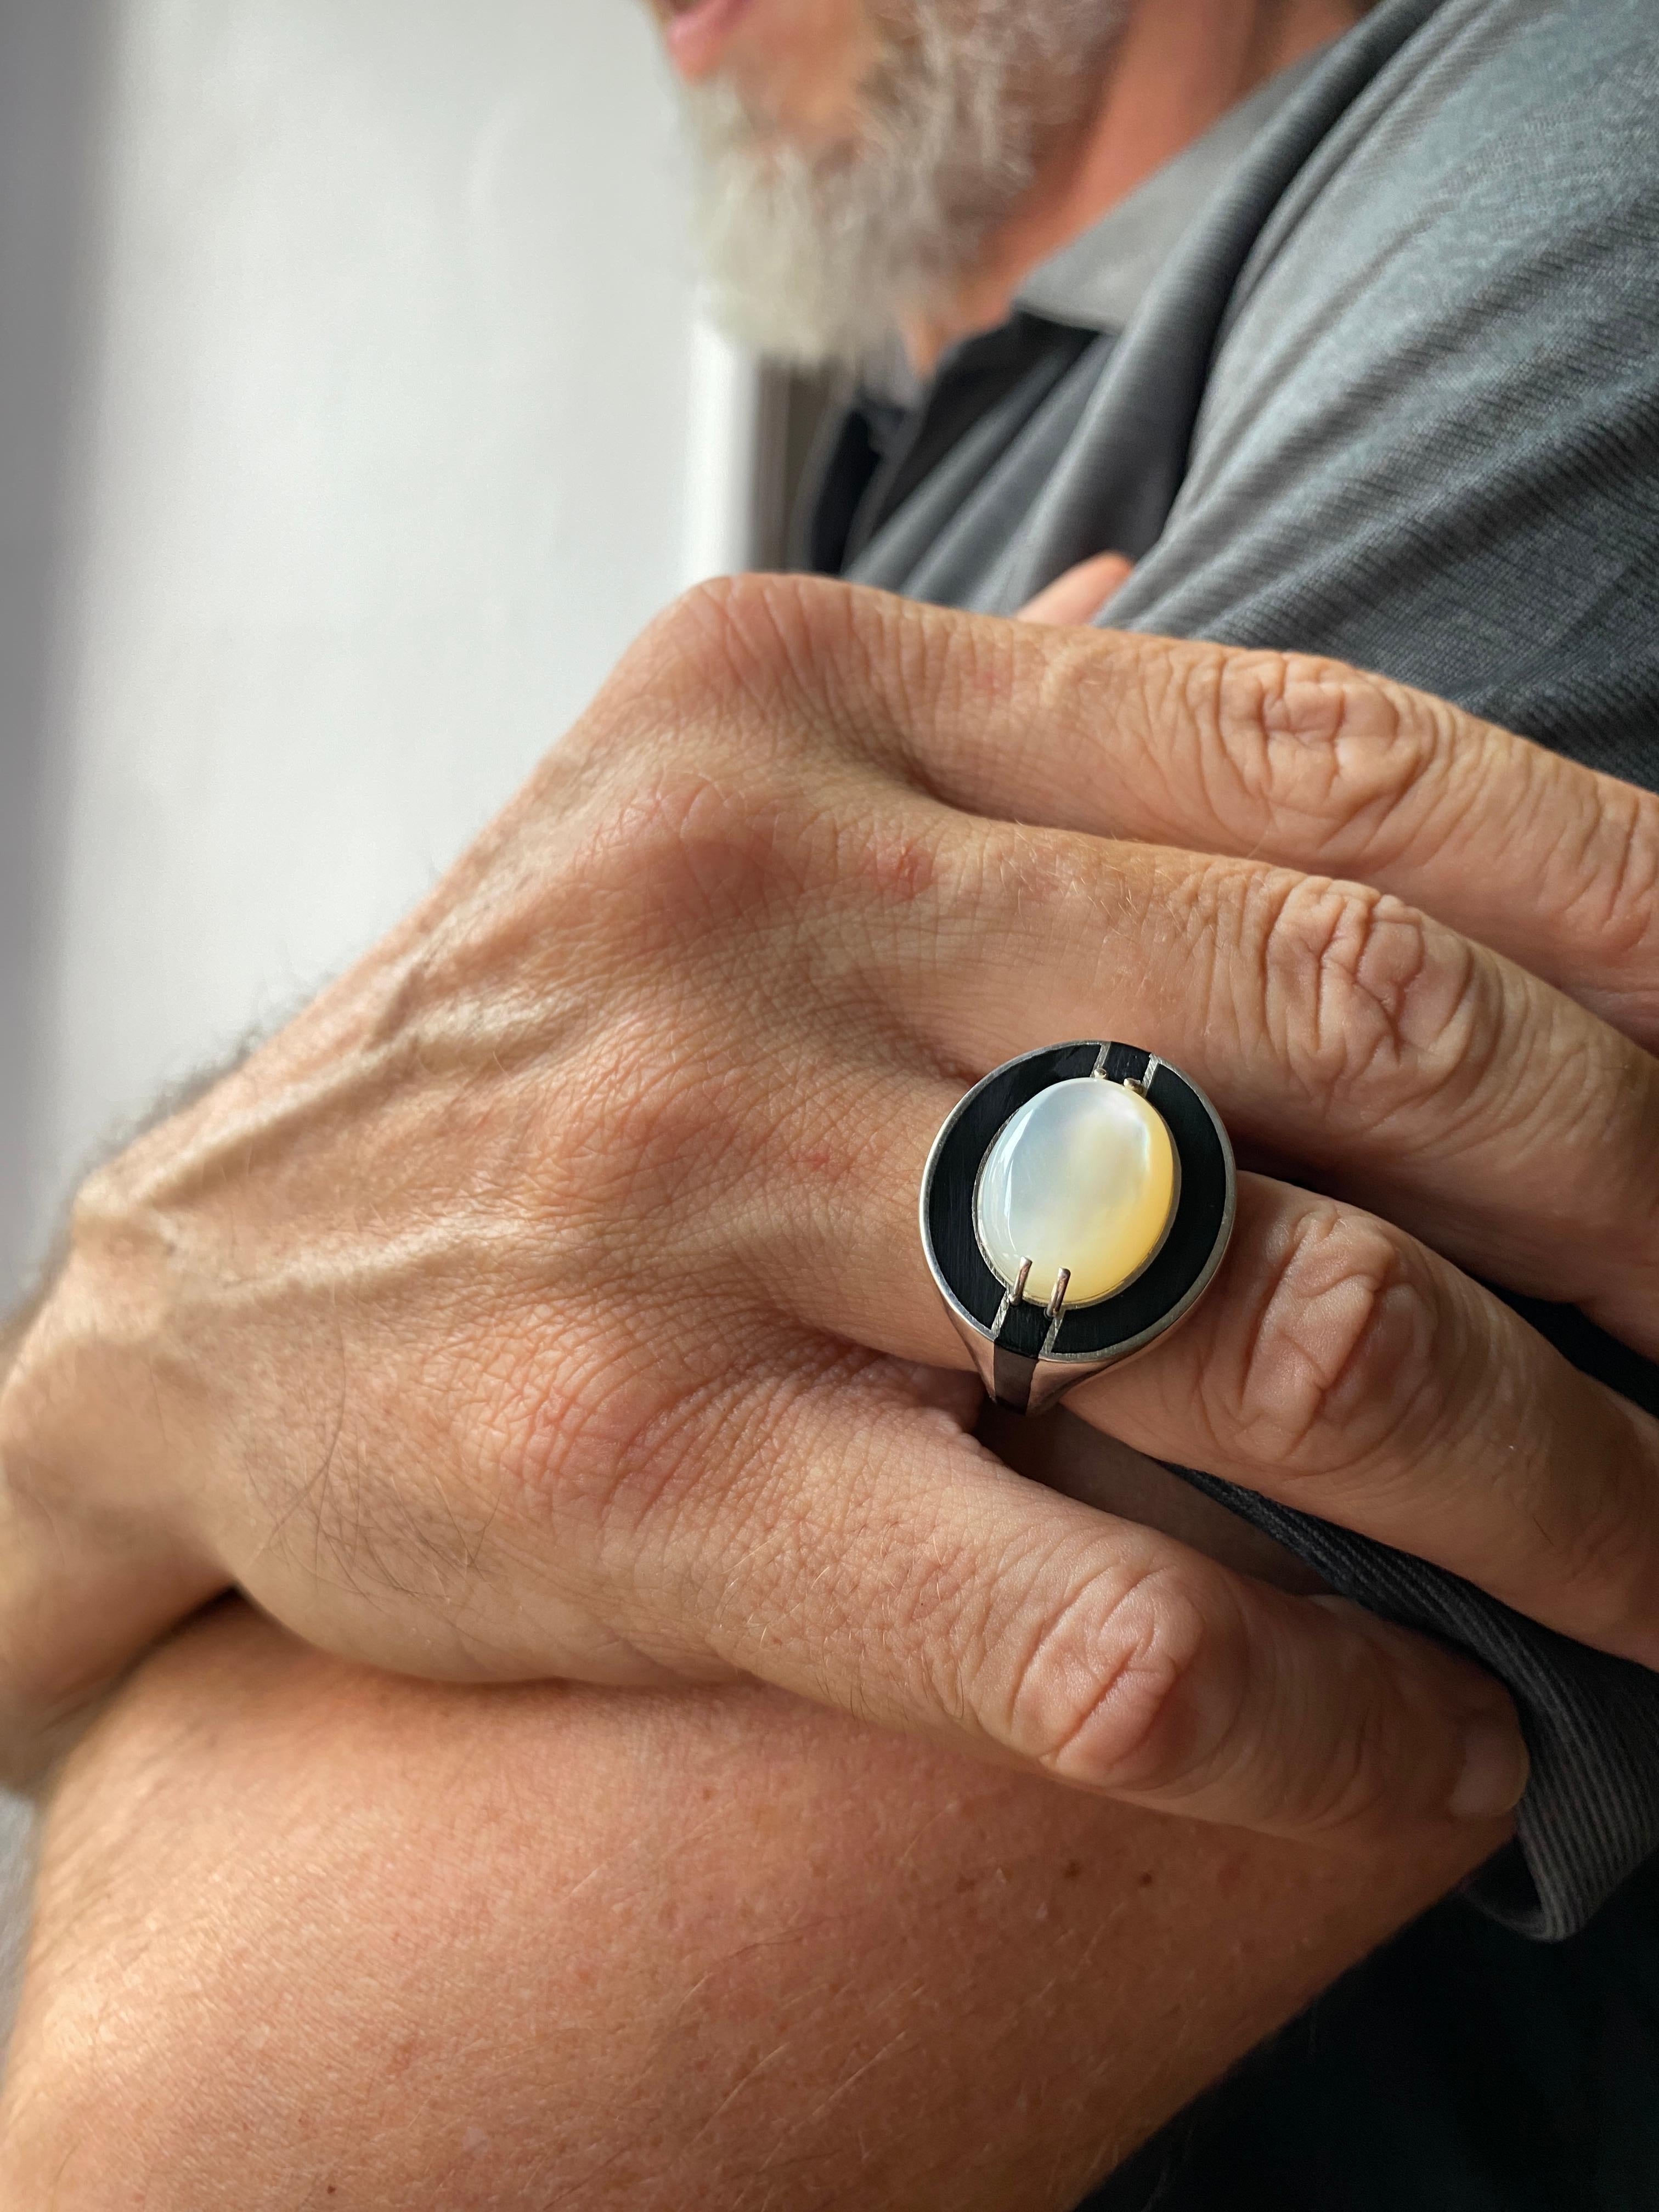 Introducing the exquisite Rossella Ugolini Design Unisex Ring, handcrafted in Italy with utmost attention to detail. This bold and striking ring features a 14K gold oval cabochon adorned with a large moonstone, symbolizing mystery and intuition.